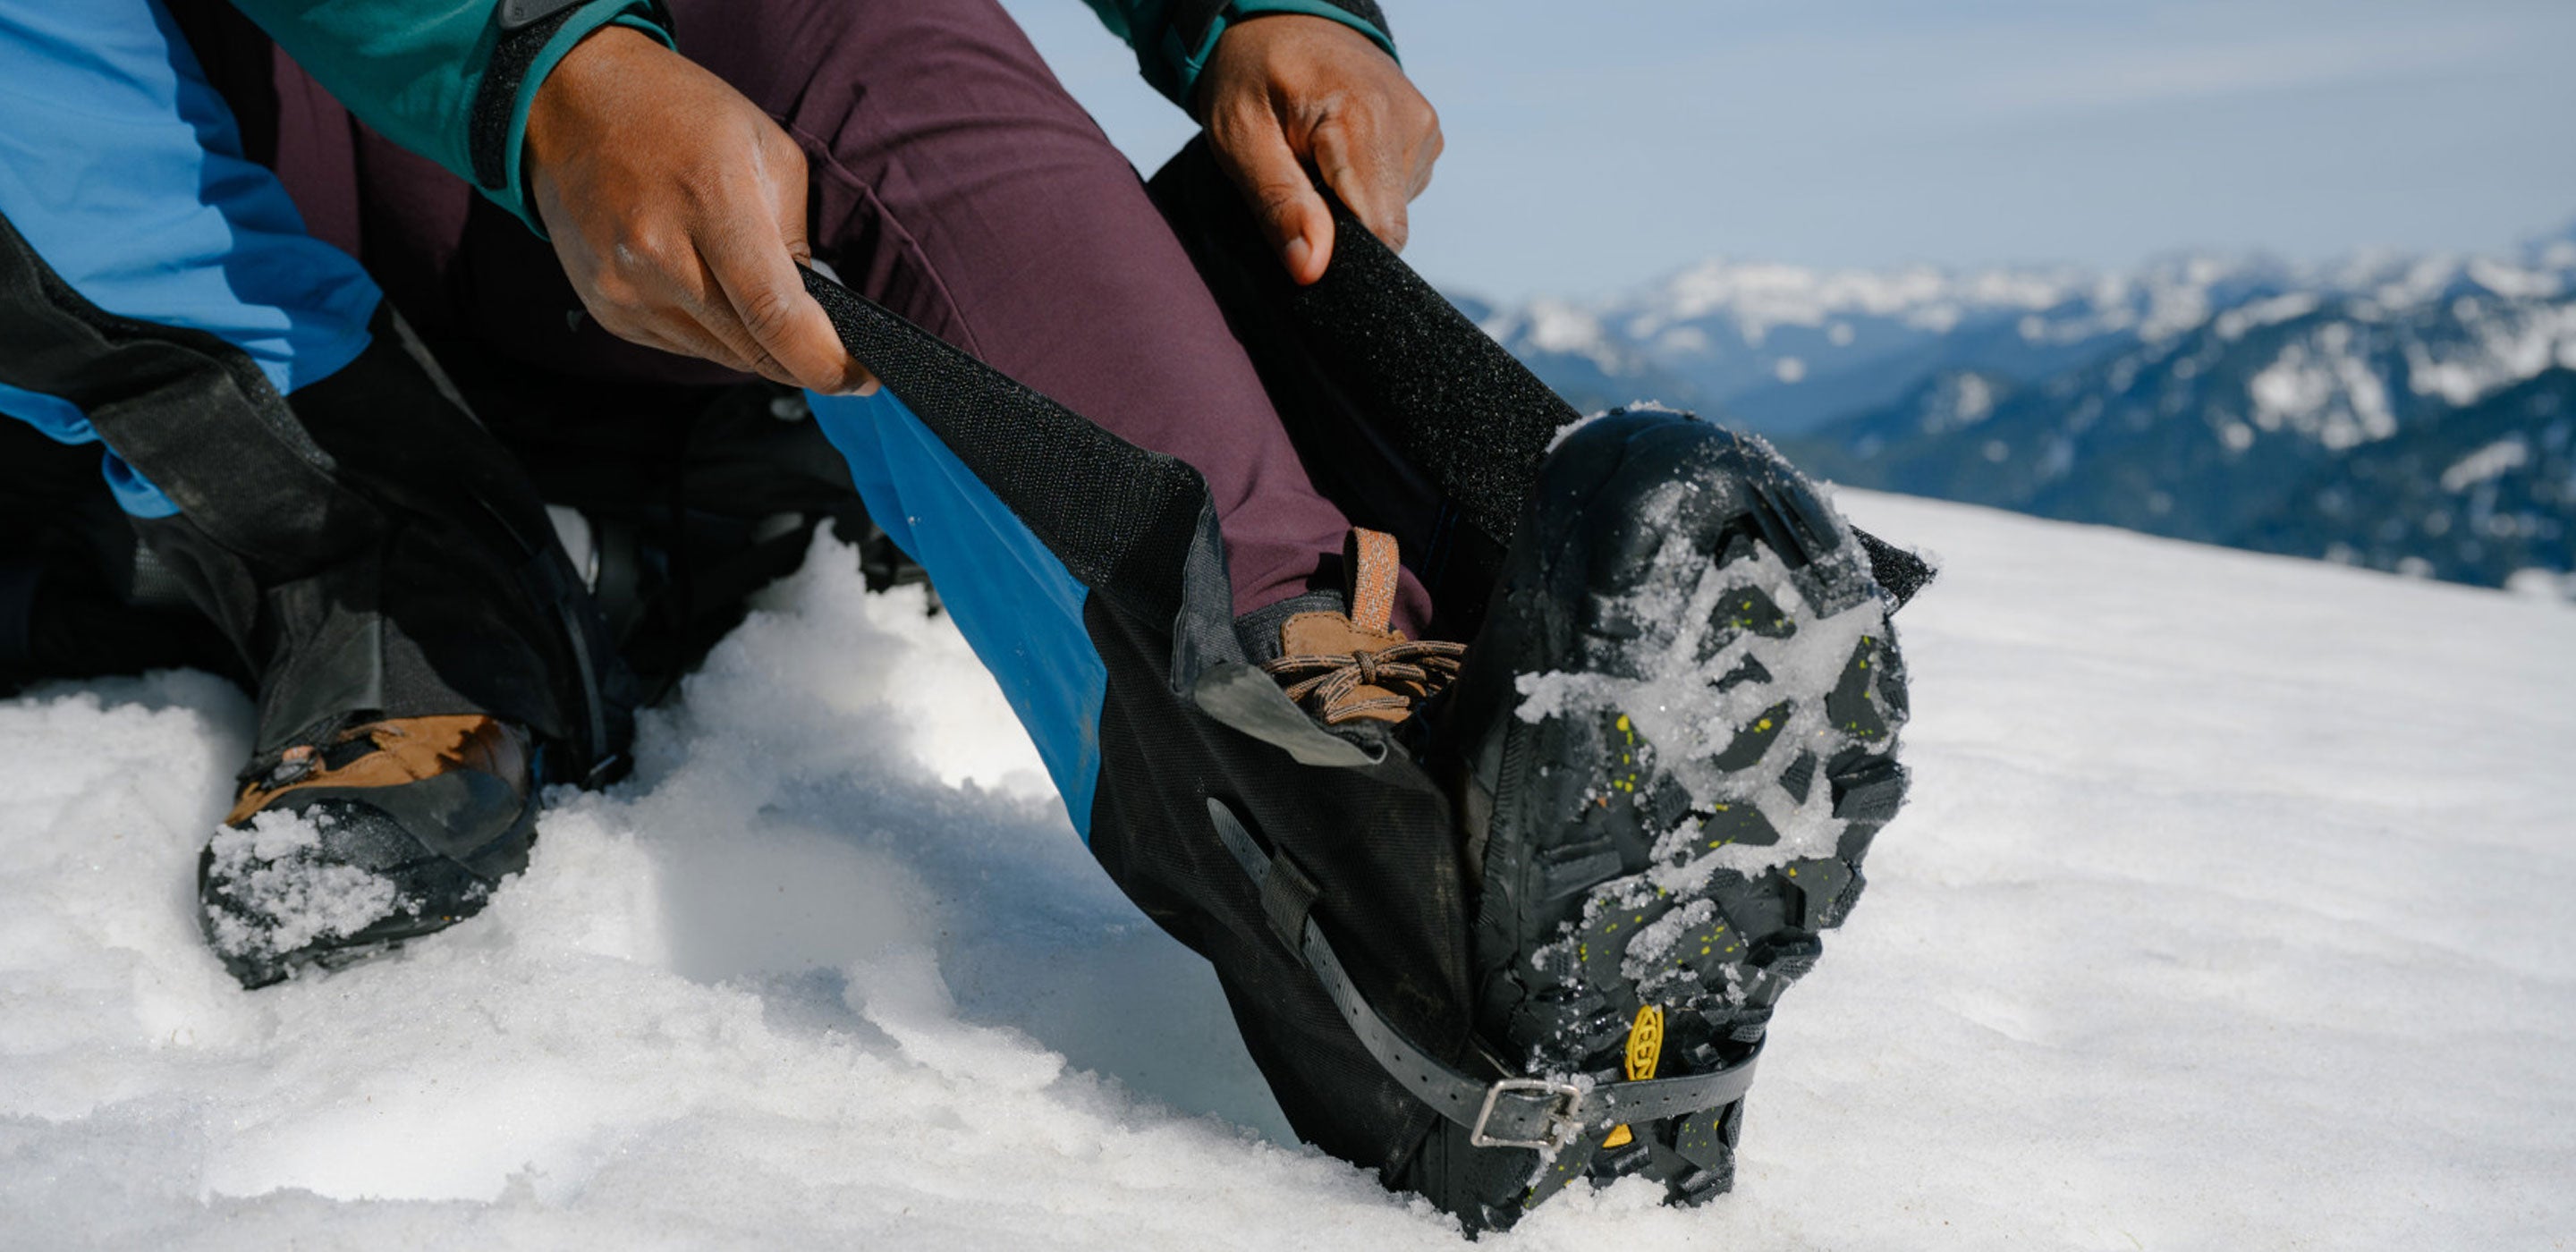 The Best Winter Hiking Boots to Wear In Slick, Snowy Conditions